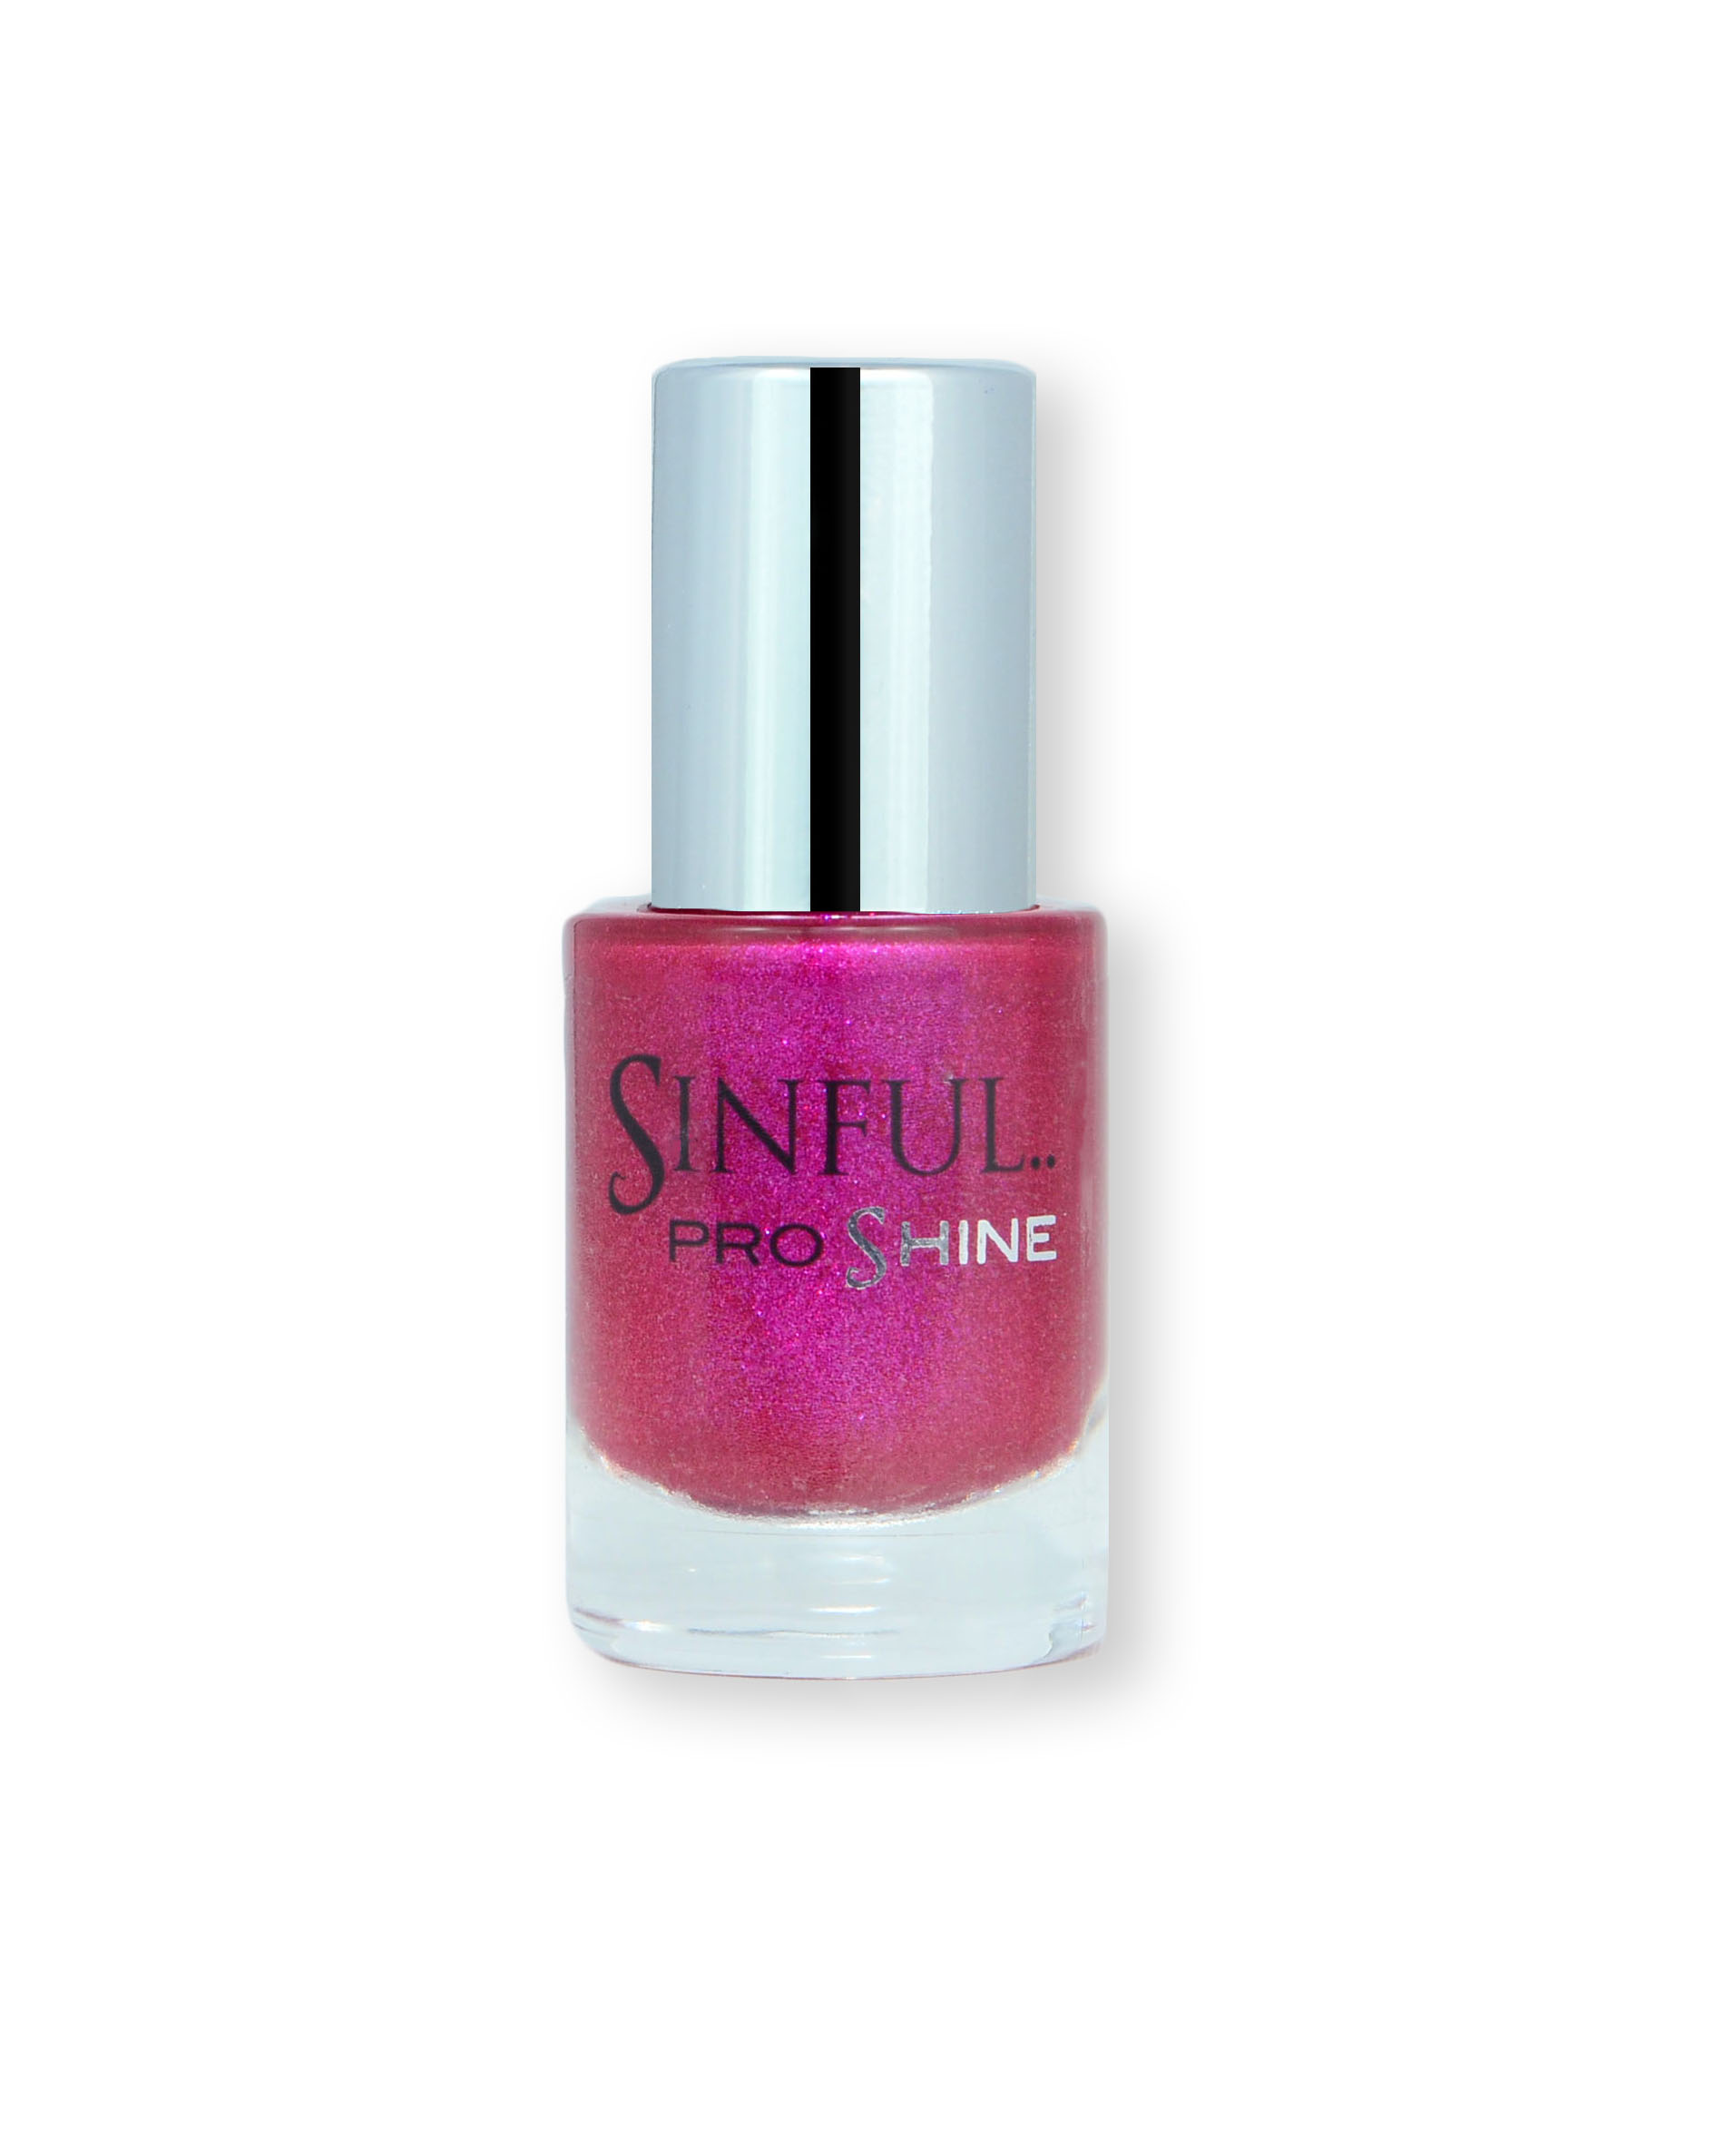 Sinful PROshine is a revolution into top spec imitation gel-like formula, easy application, full coverage and a sleek finish. Spoil yourself with the choice of 42 shades, expertly formulated with the finest grade of pigments. Karmasutra: Violet and magenta pearls specially blended together.